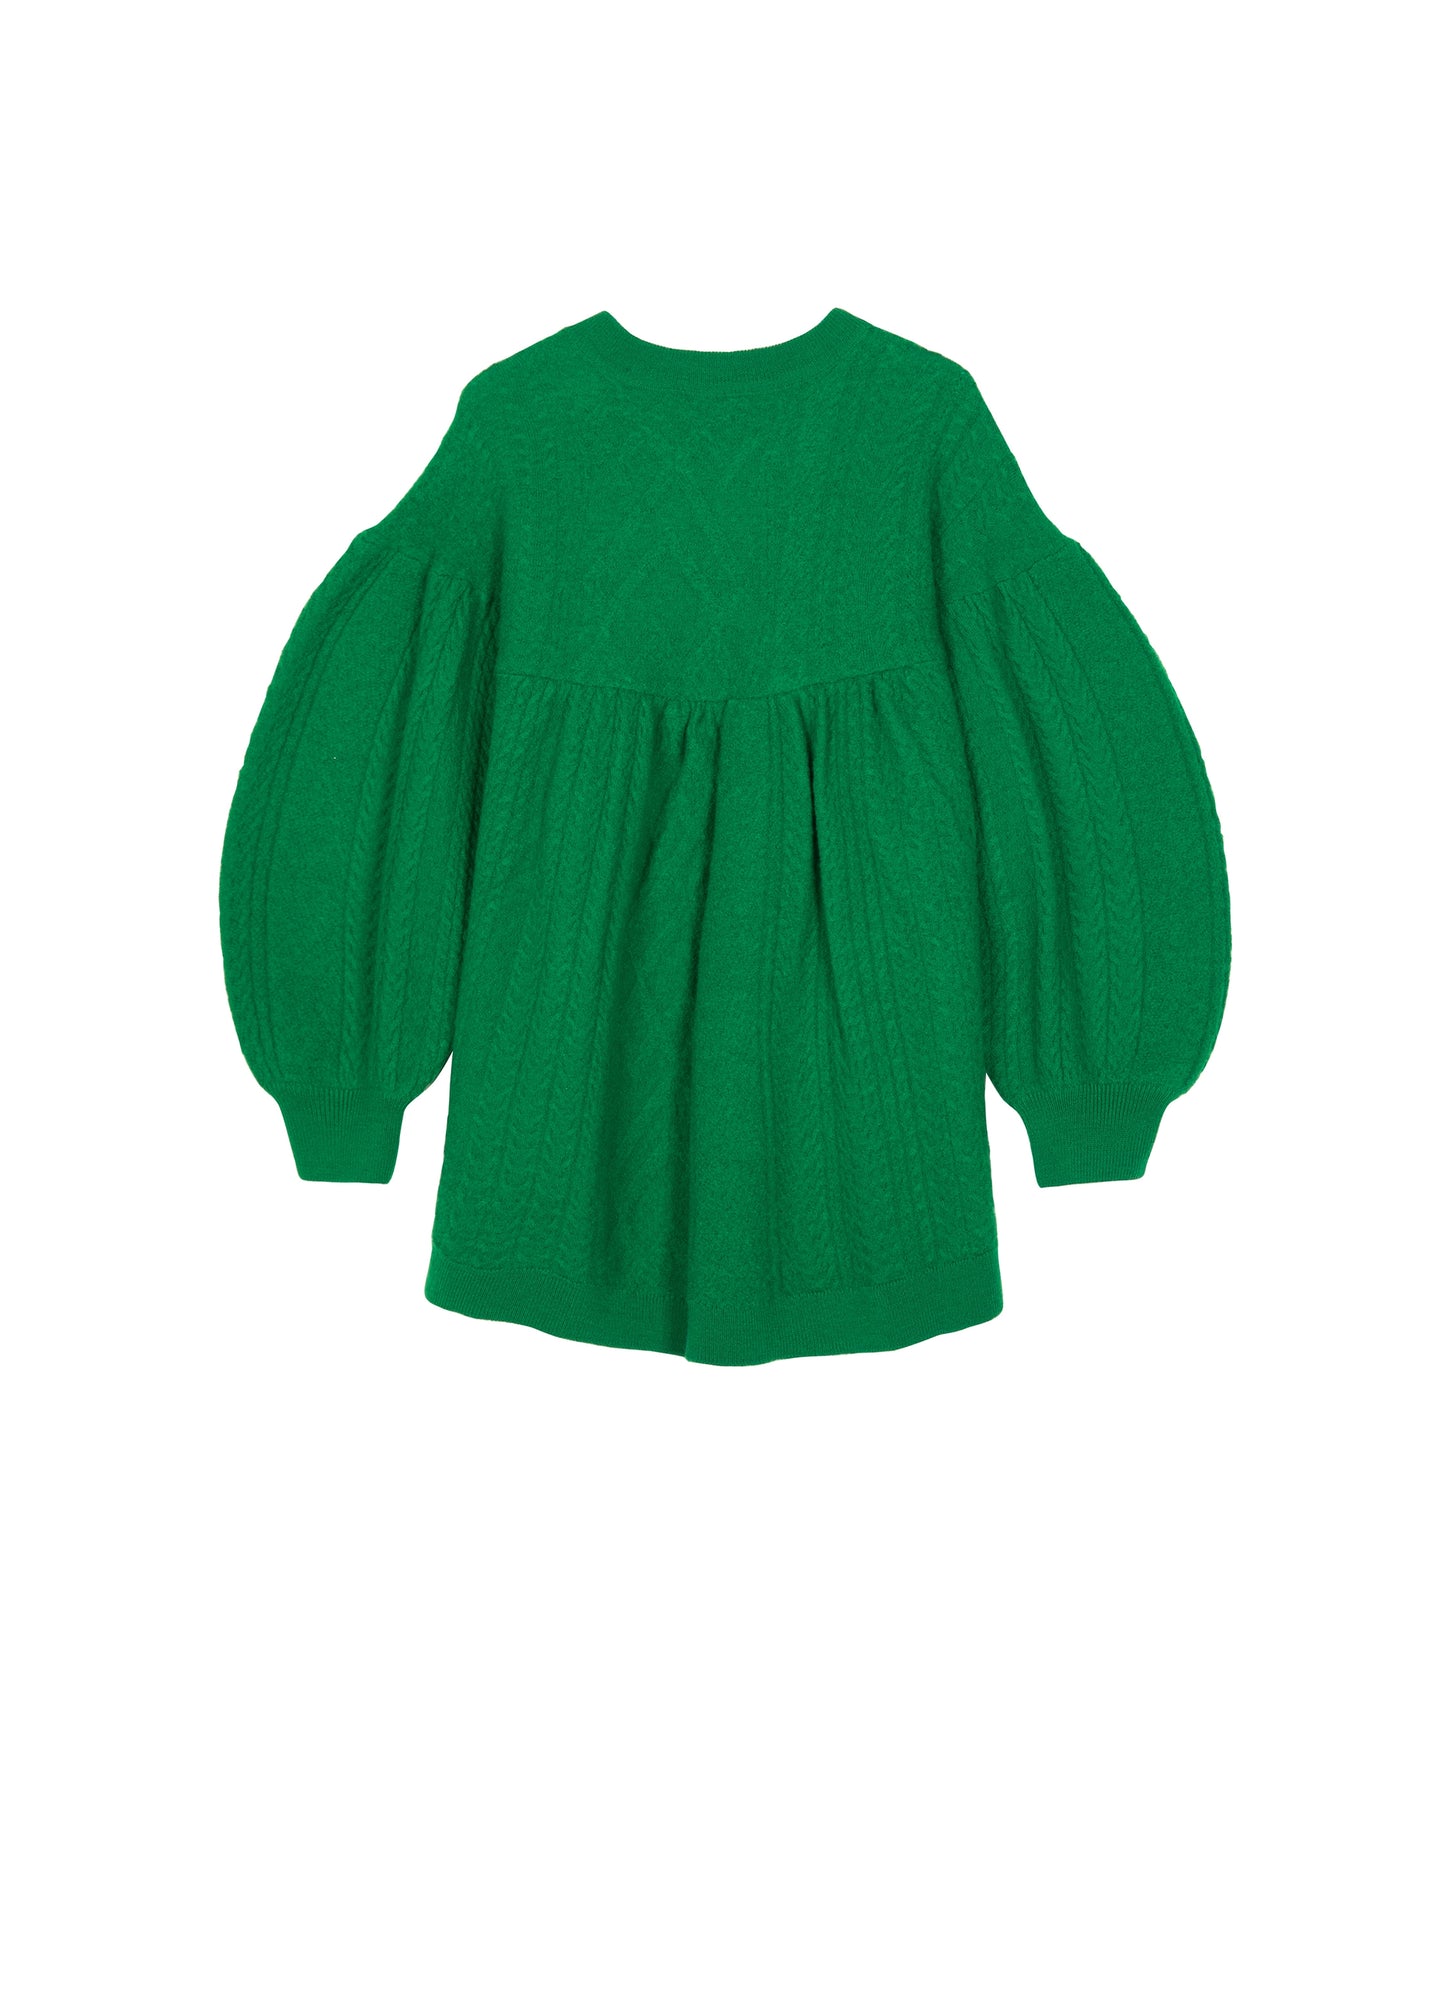 JNBY Green Cable Knit Flare Dress [Final Sale]